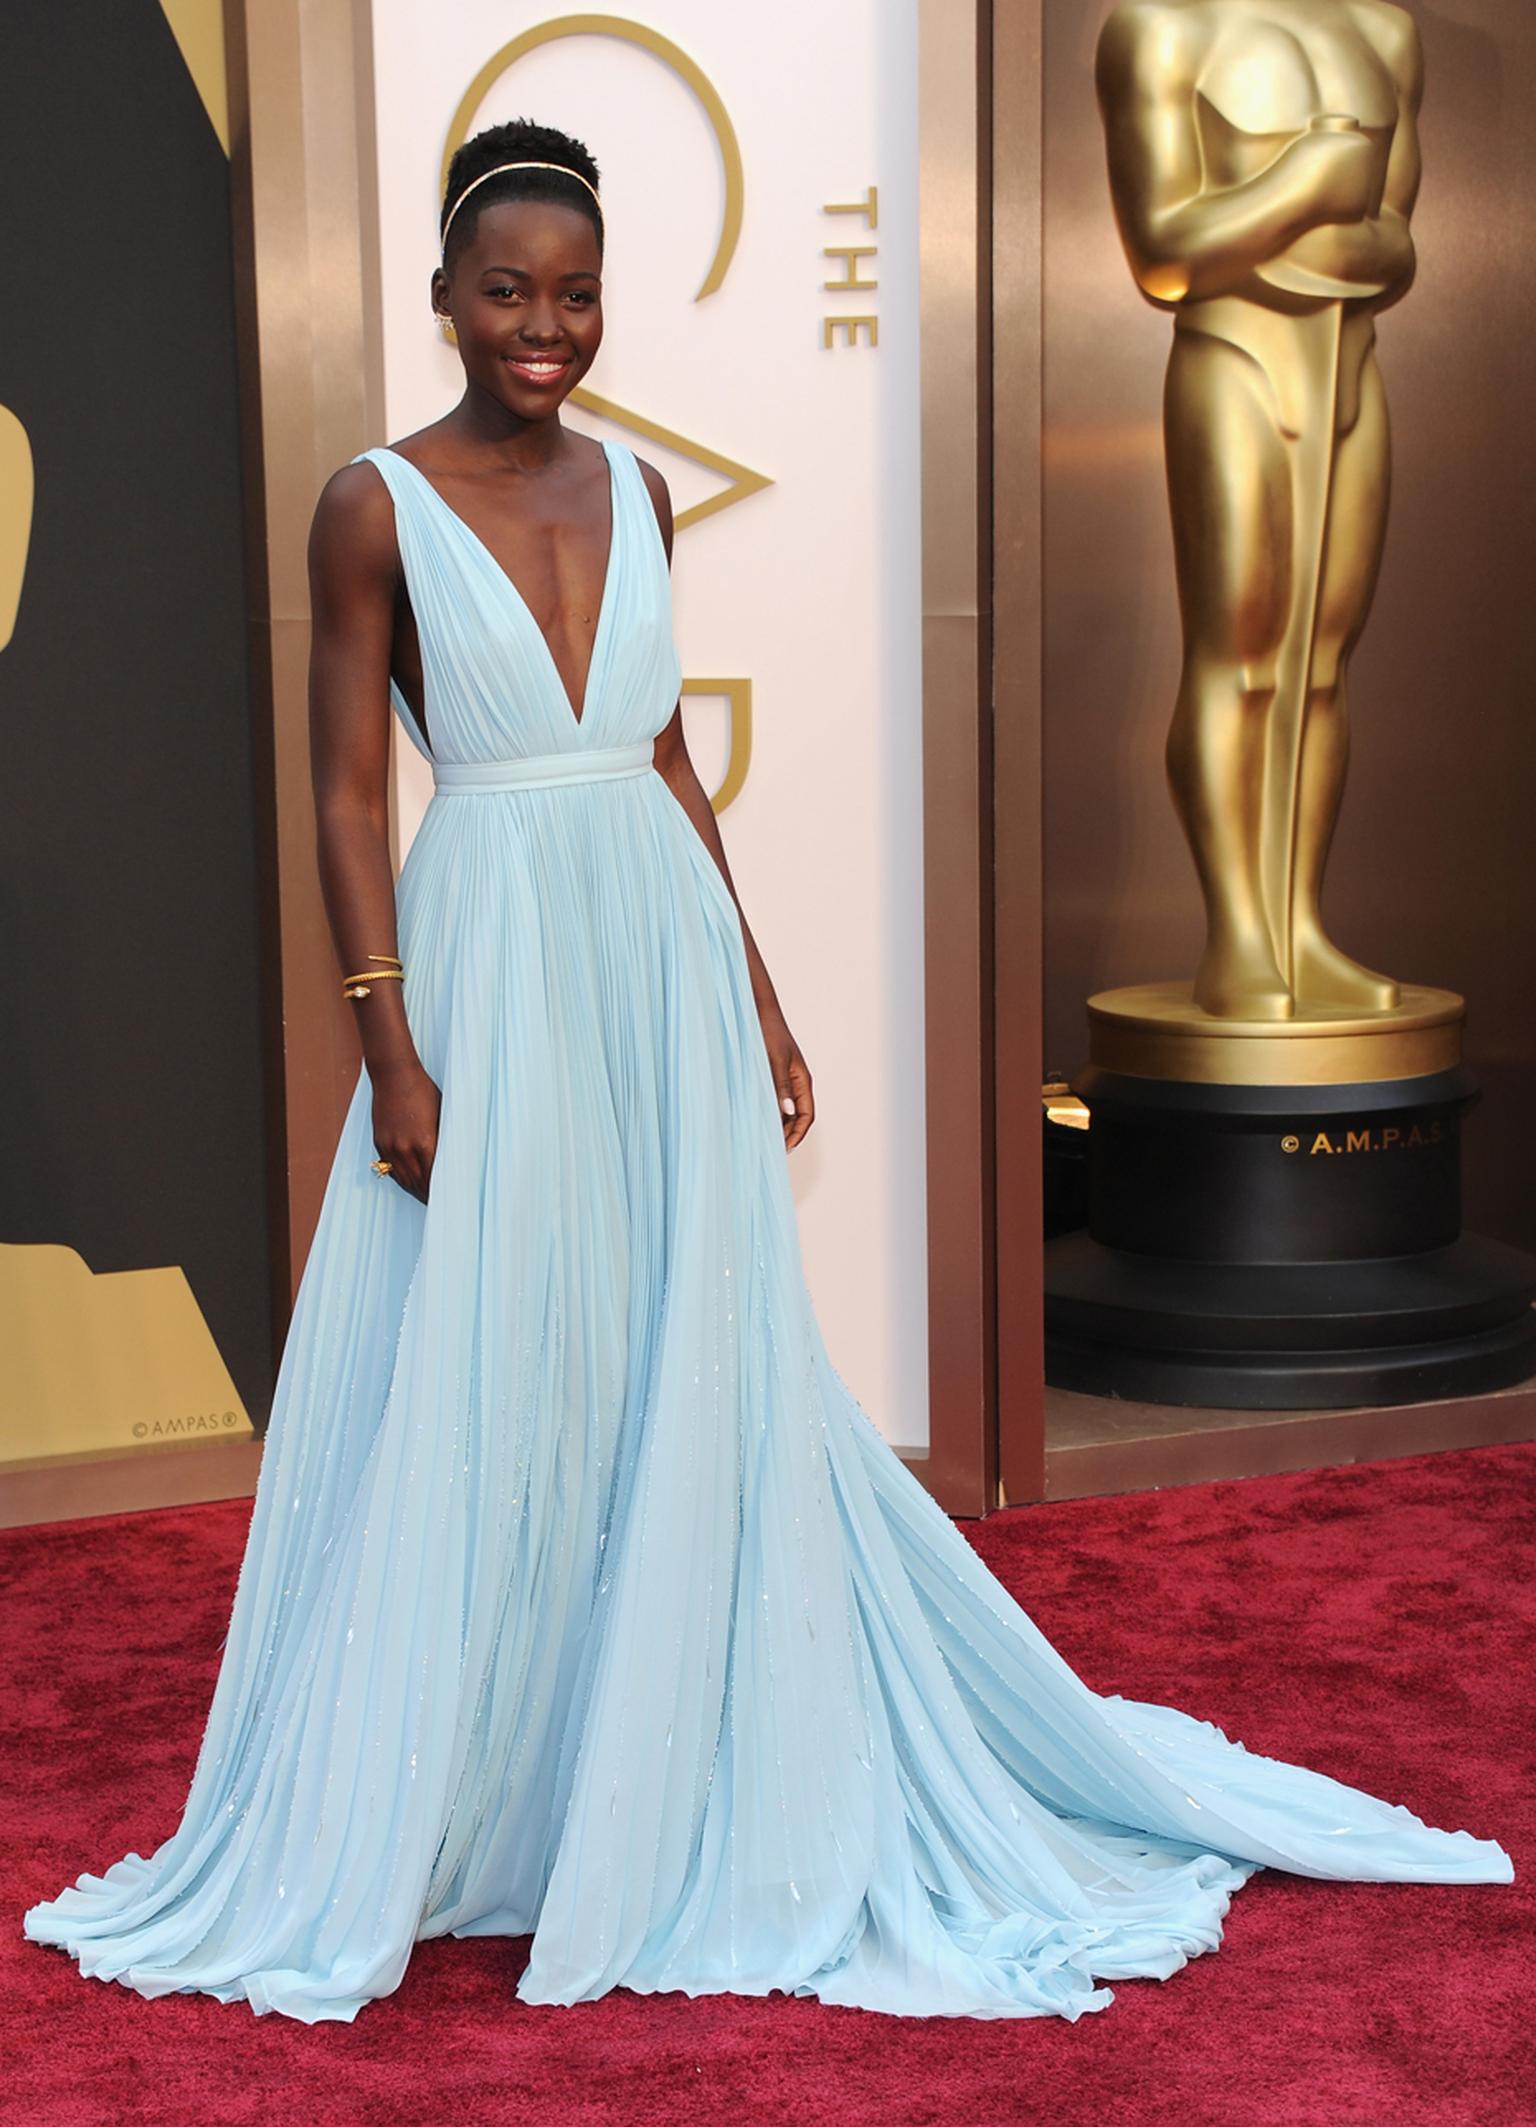 Best Supporting Actress winner, Lupita Nyong'o, dazzled in Fred Leighton jewels at the 86th Annual Academy Awards